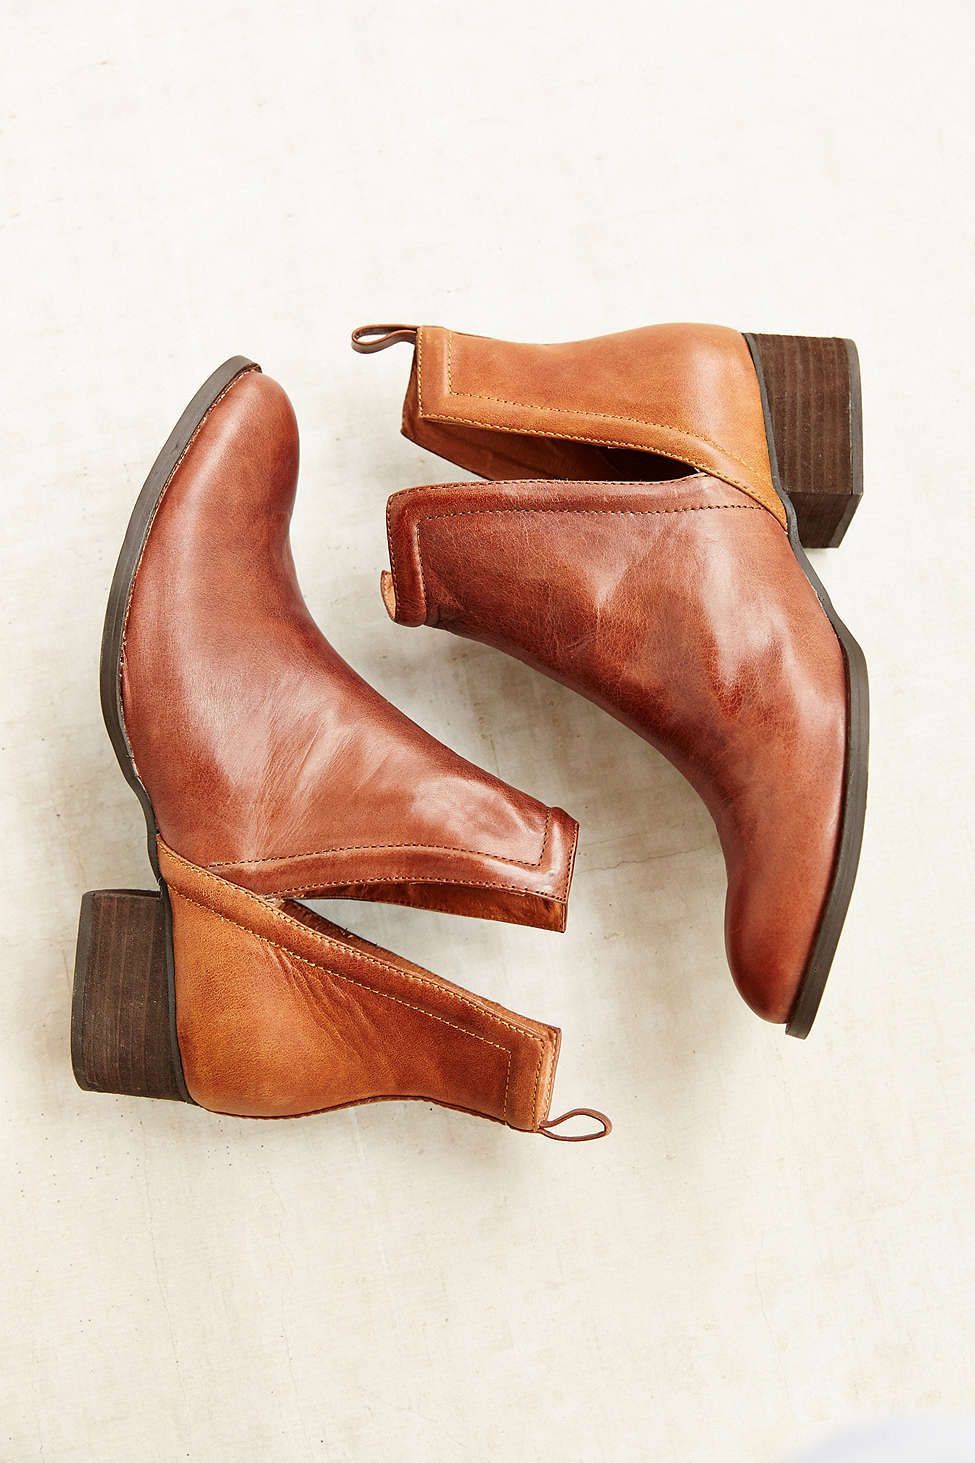 // Jeffrey Campbell Leather Muskrat Boot. Why am I so in love with these?!